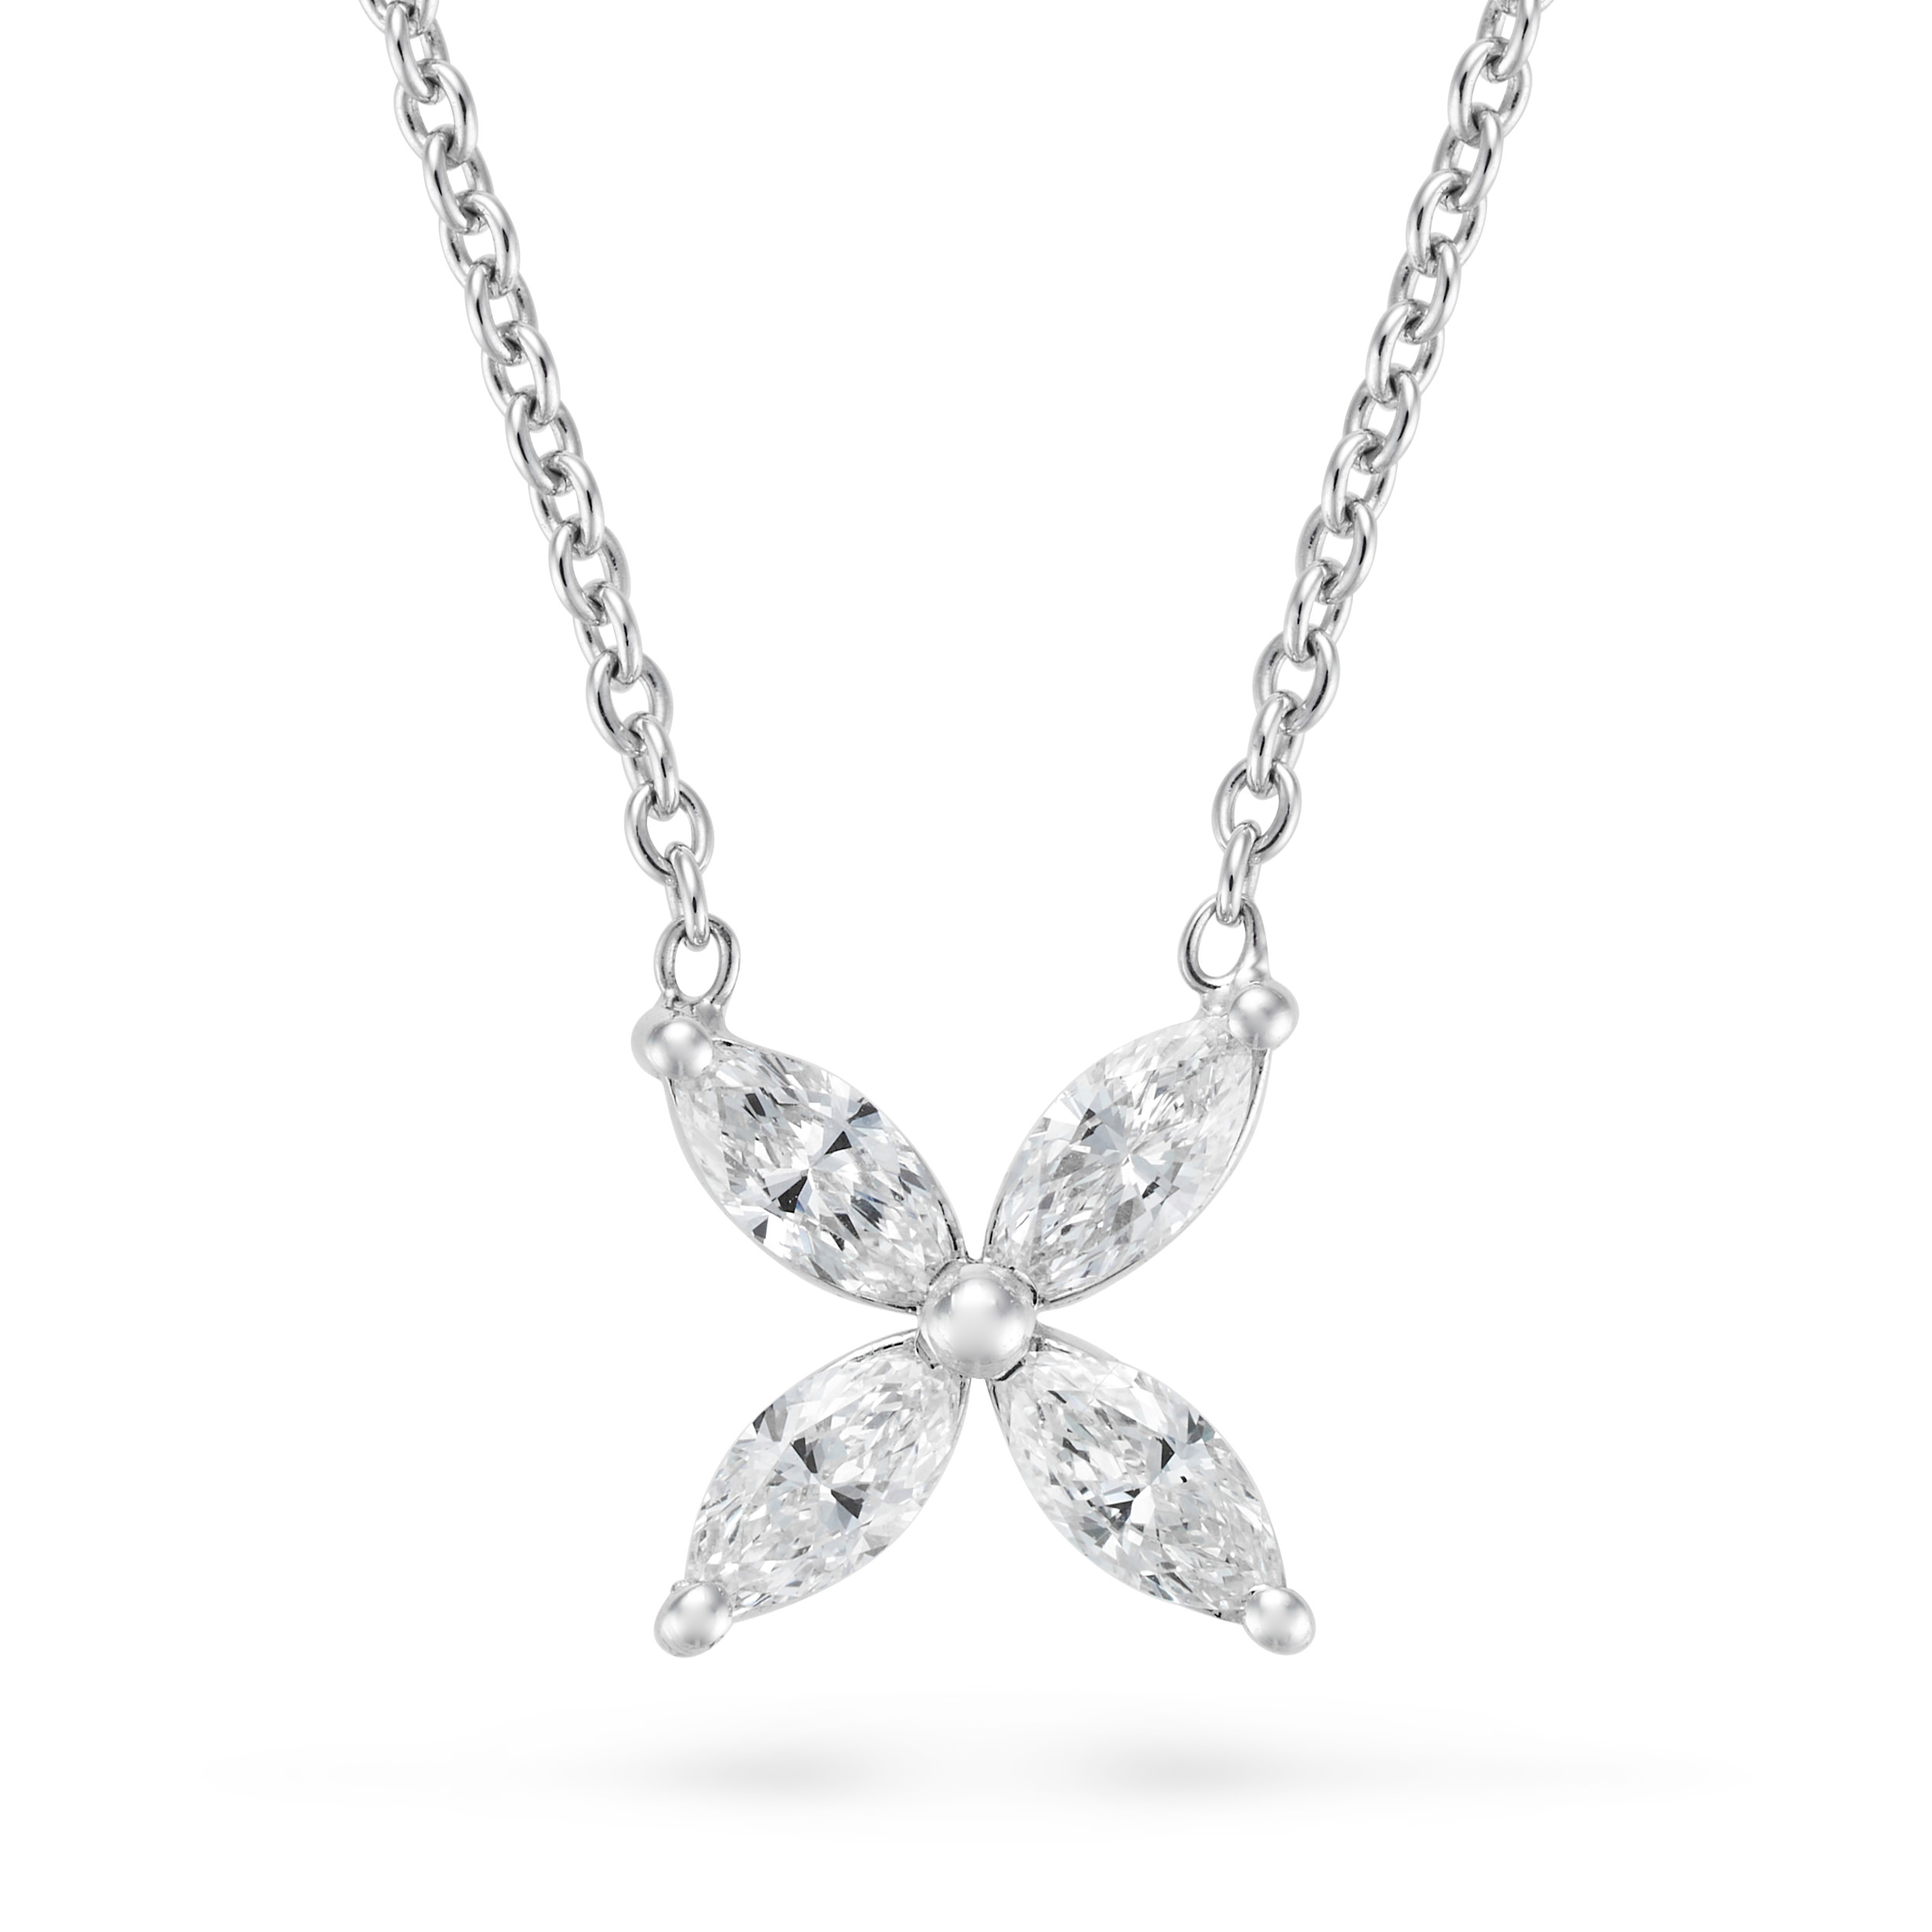 A DIAMOND PENDANT NECKLACE the pendant set with four marquise cut diamonds, suspended from a trac...